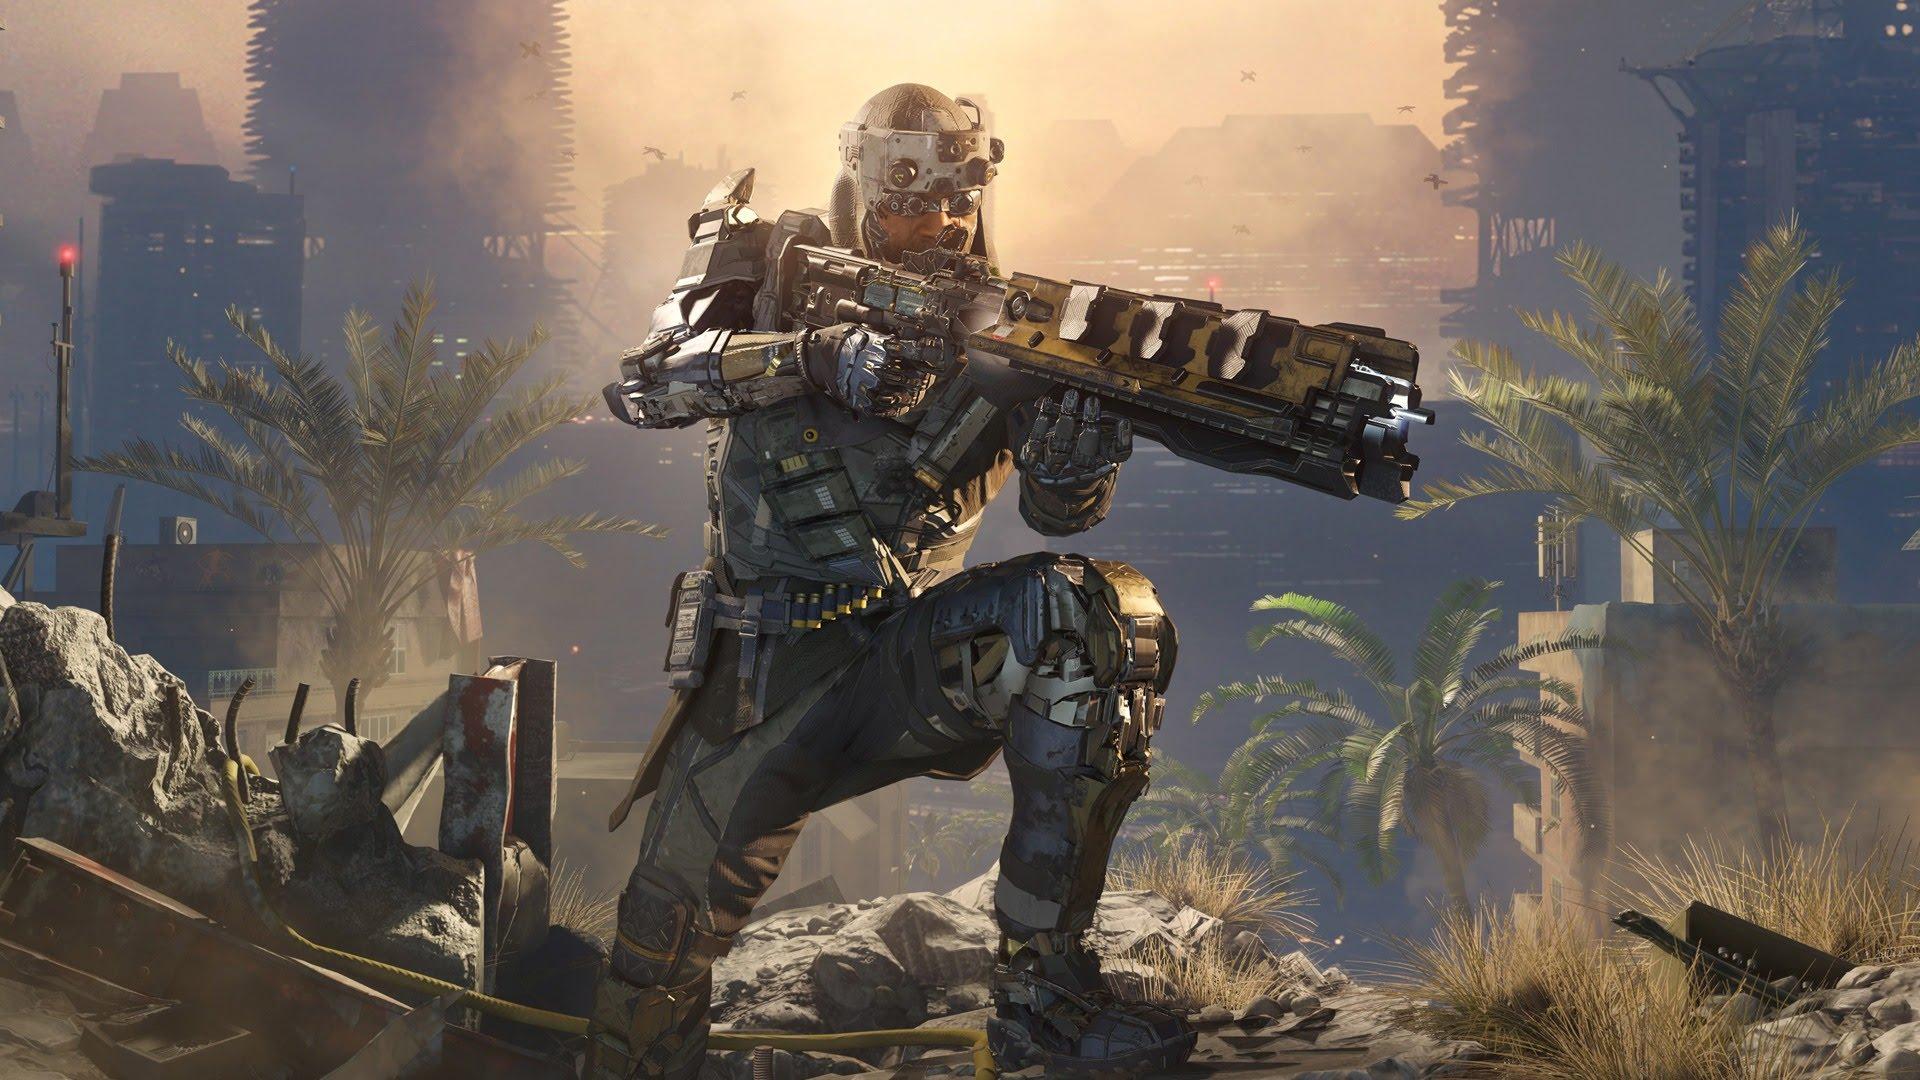 Black Ops 4 kills the campaign in favor of some battle royale